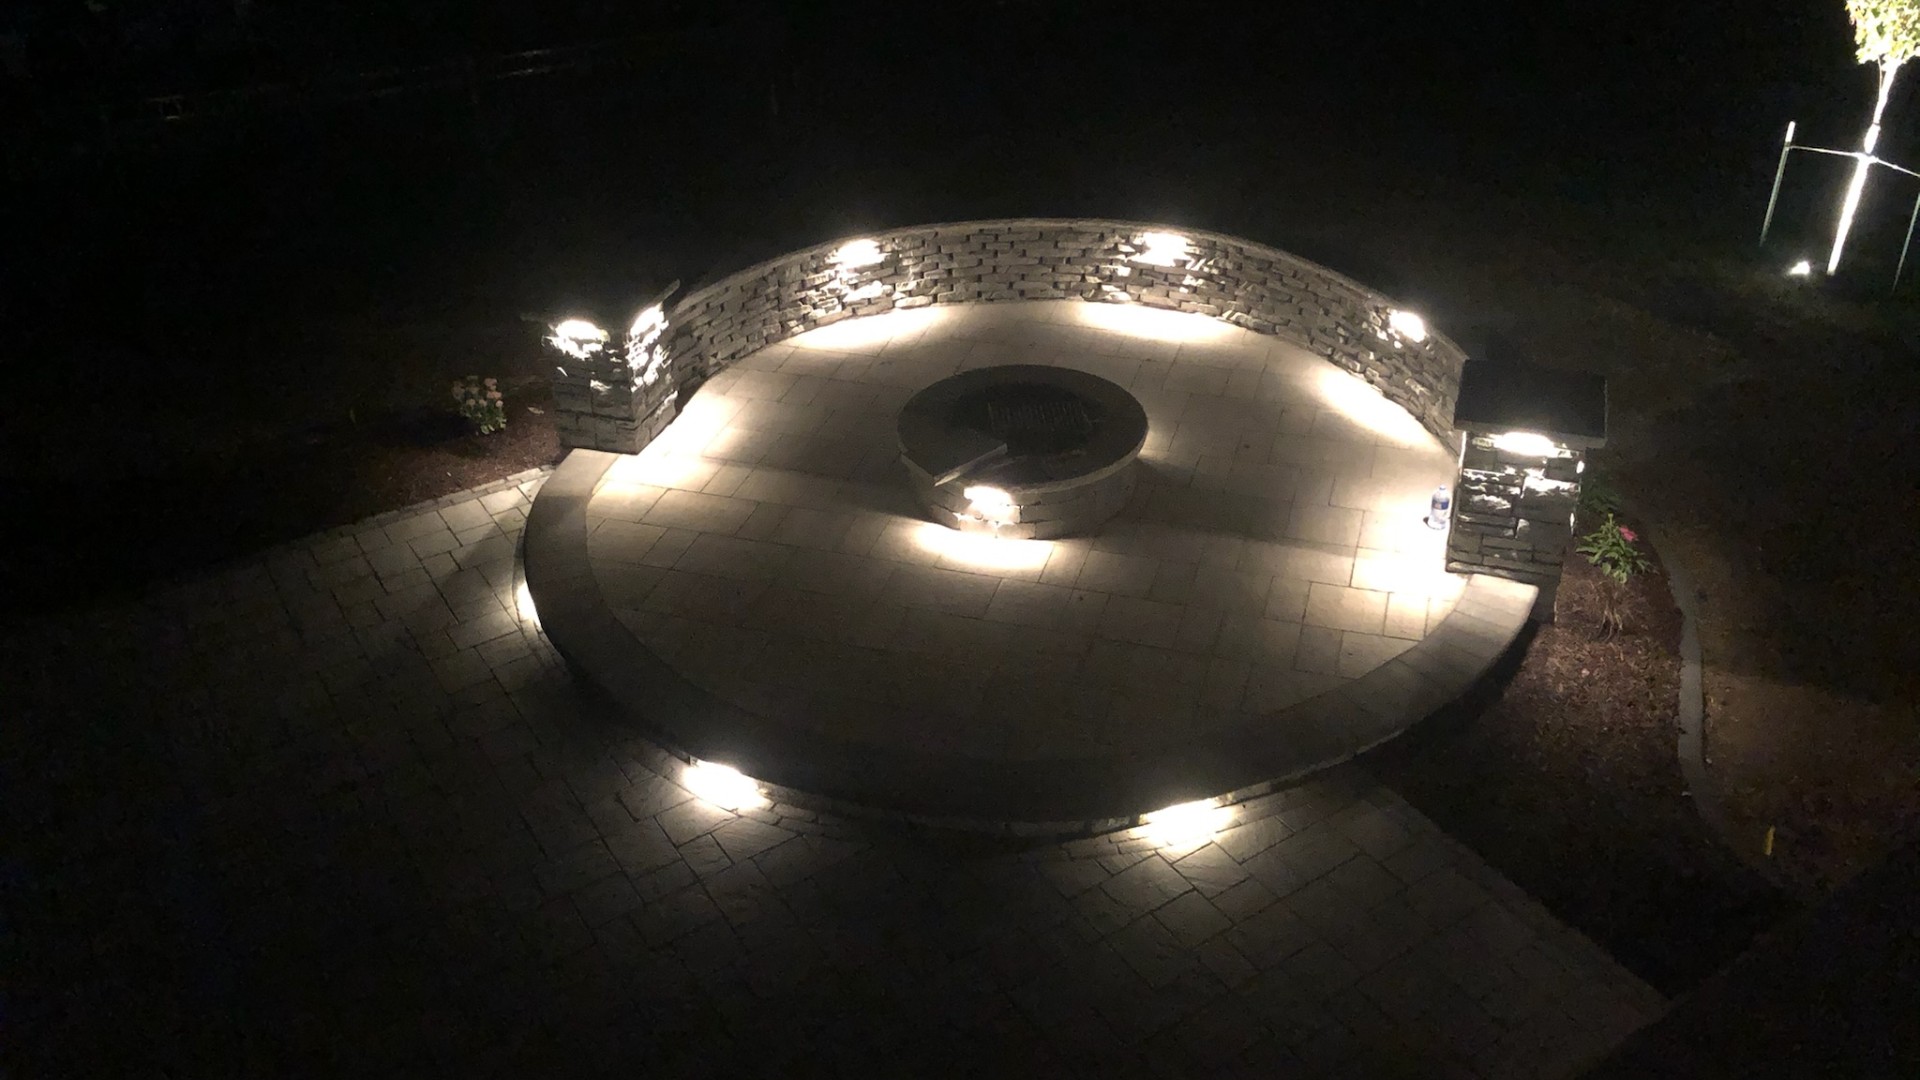 Lighting installed for patio and fire pit in Grimes, IA.